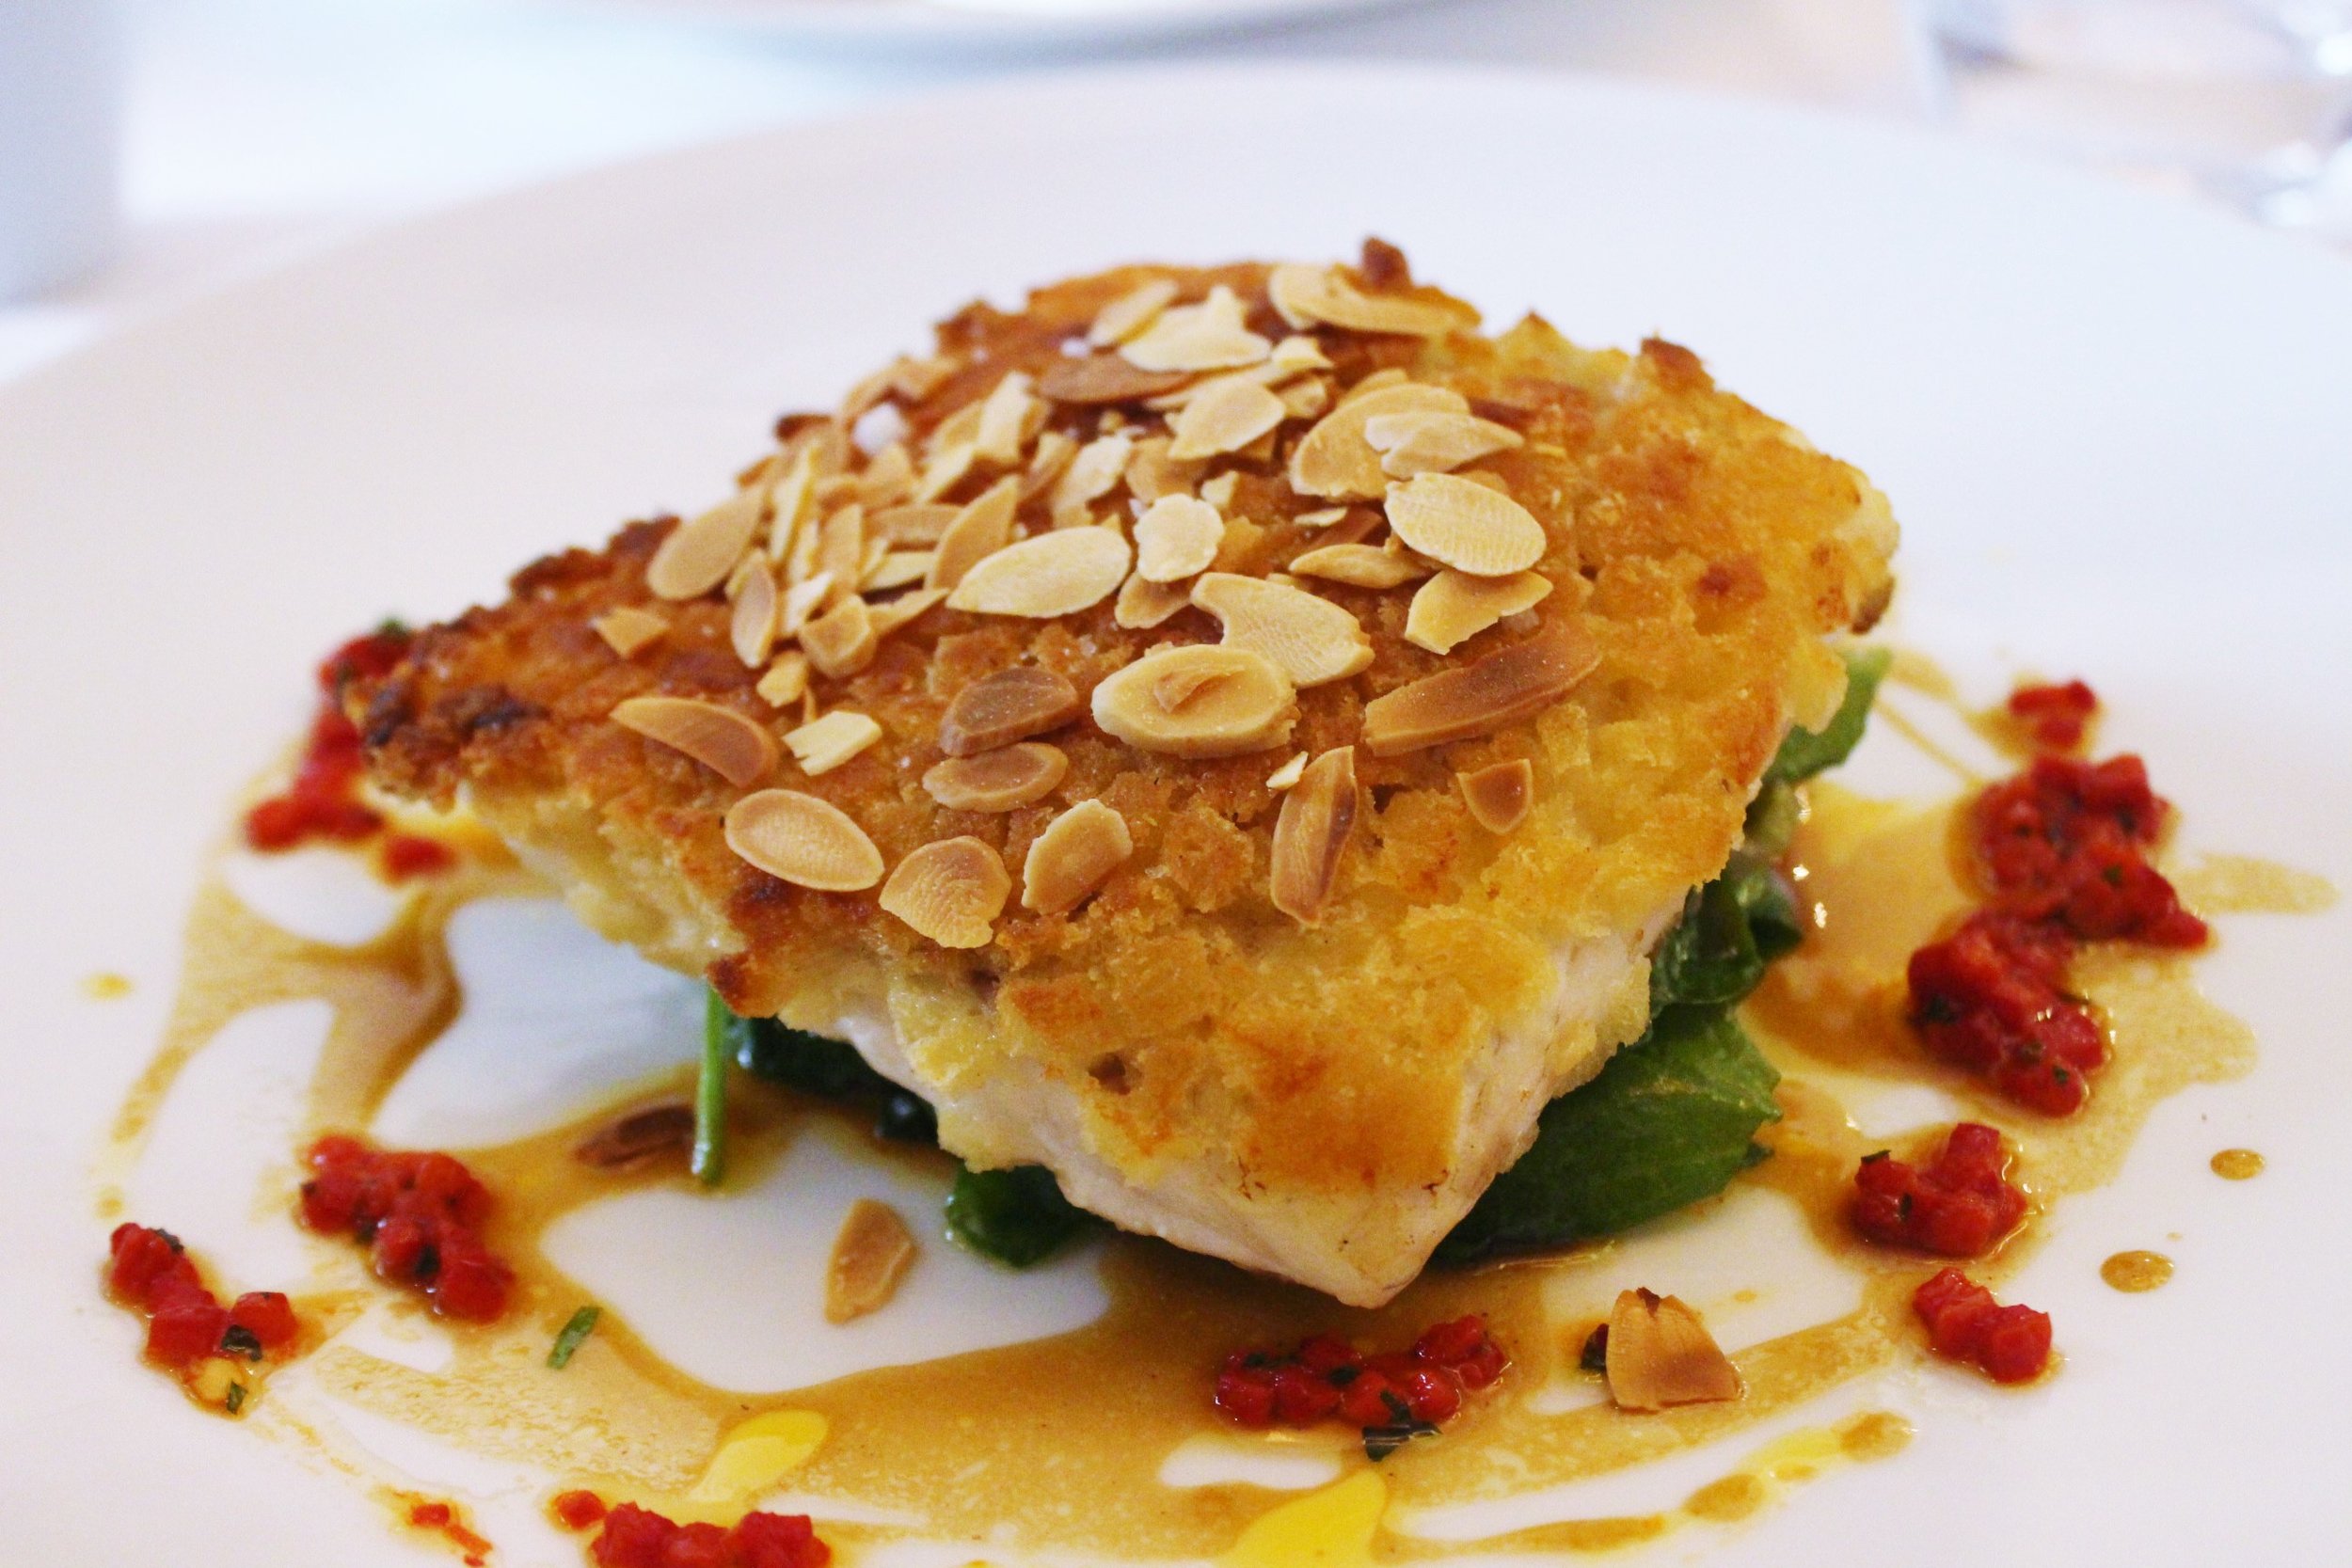 Supreme of Seabass, Crispy Almond Crust with Curried Oil and Peppers